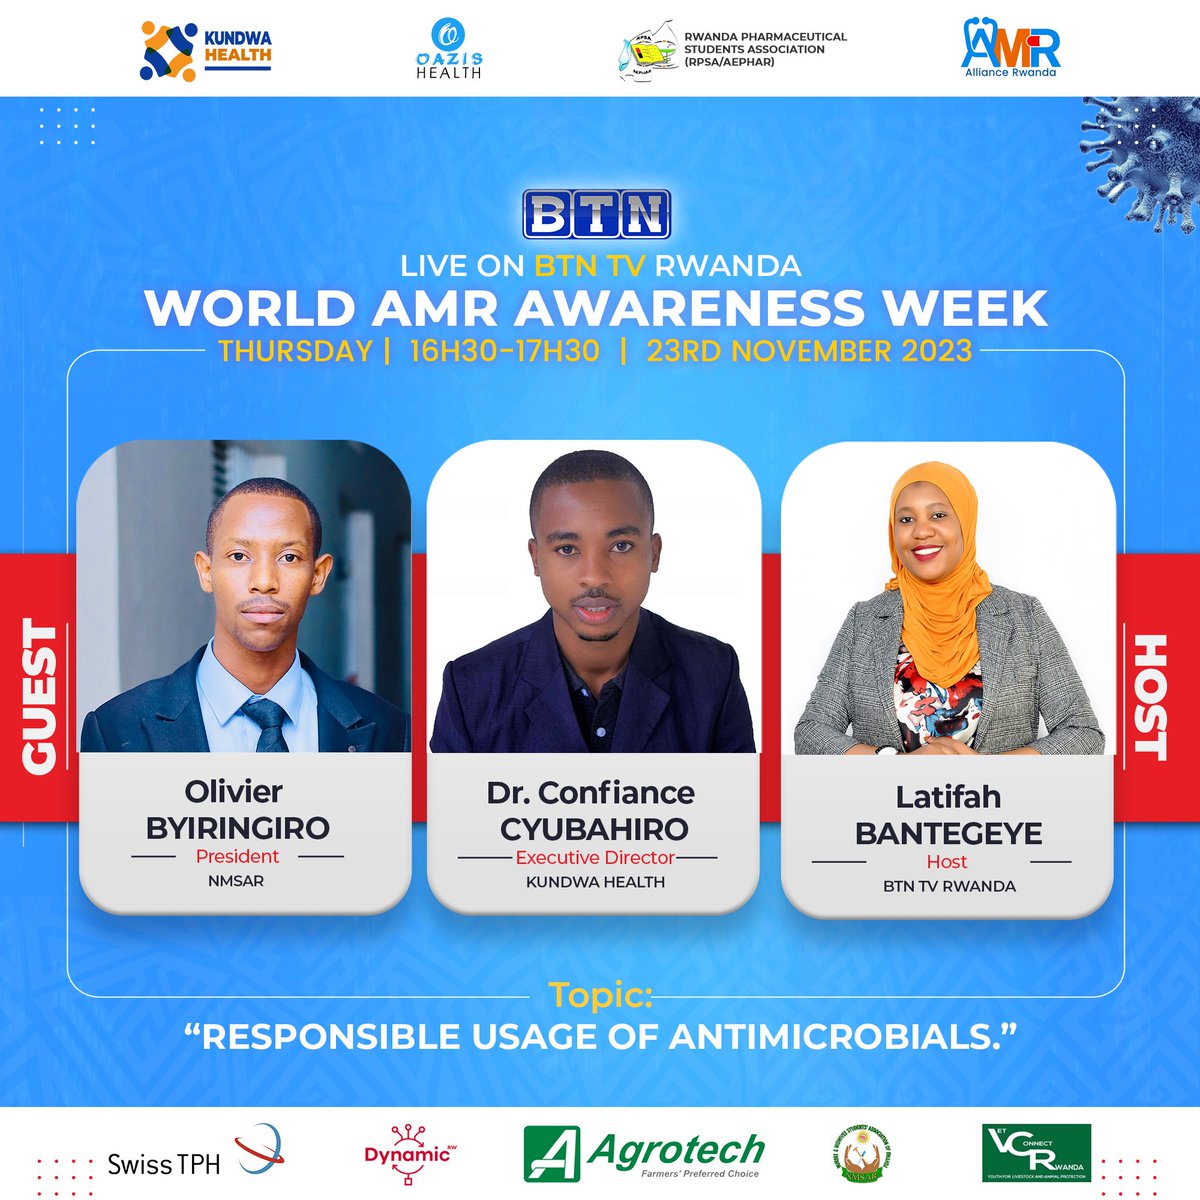 We're live today at 16h30-17h30 on @btntvrwanda in line with #WAAW2023Rw .Tell your friend to tell a friend to TuneIn as we raise awareness on Responsible use of #antimicrobials #WAAW2023